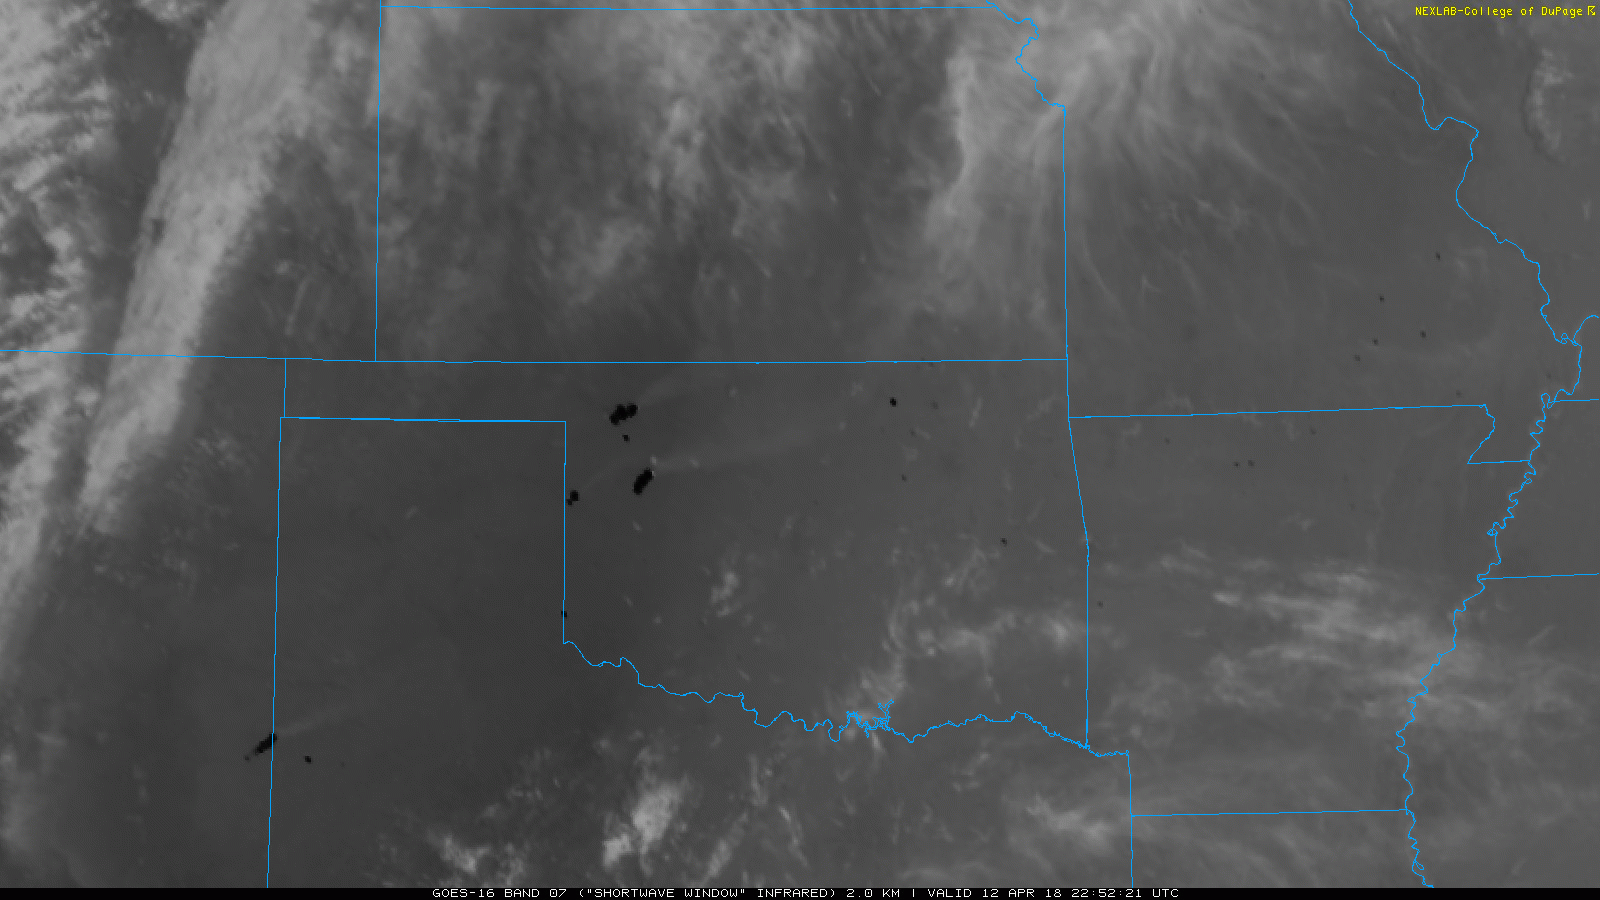 5-minute infrared satellite animation valid from 5:52 pm to 6:37 pm on 12 April 2018. The imagery is courtesy of the College of DuPage.